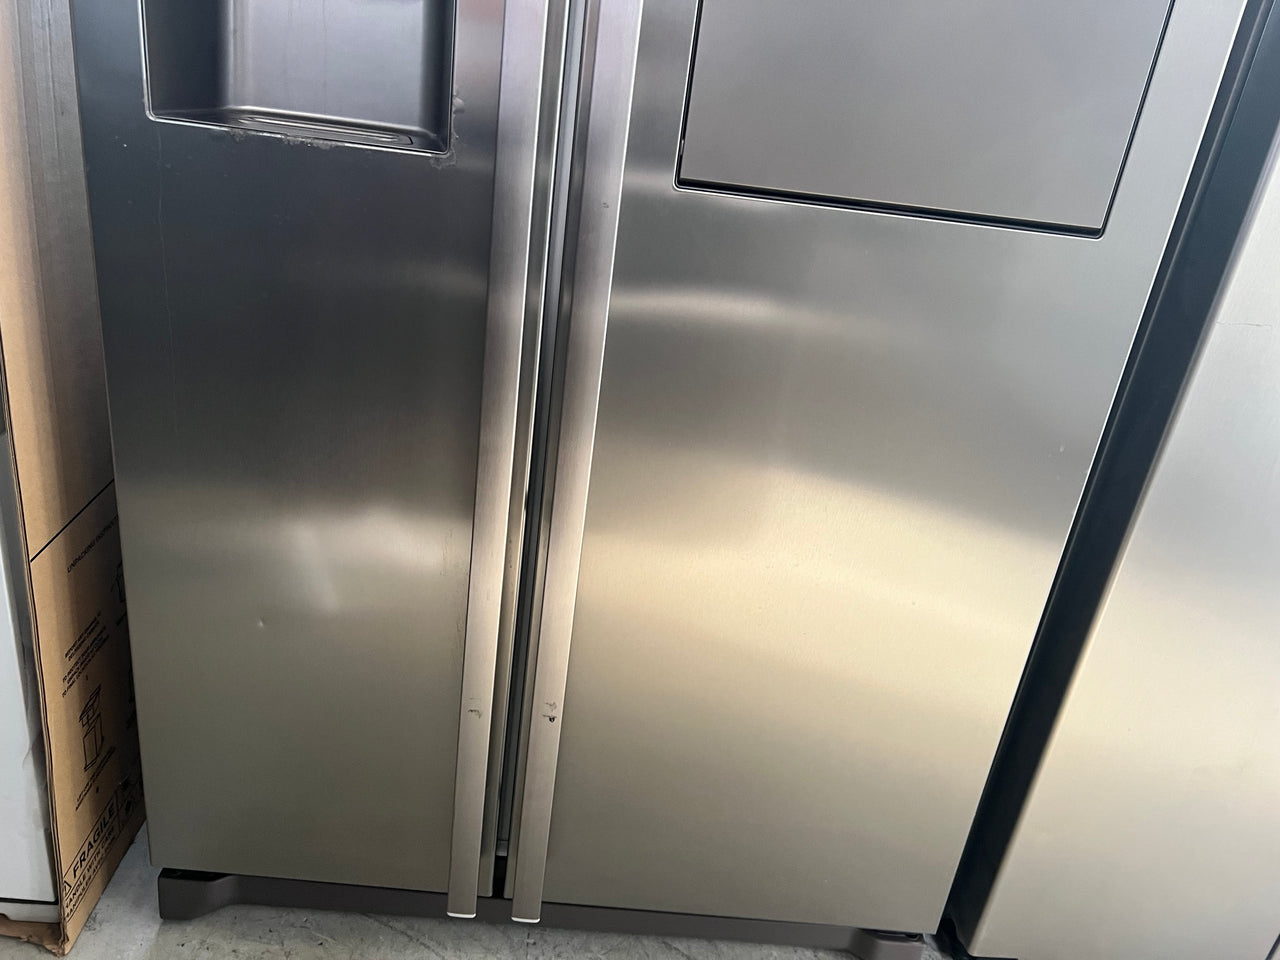 Second hand Samsung SRS580DHLS 580L Side by side - Second Hand Appliances Geebung